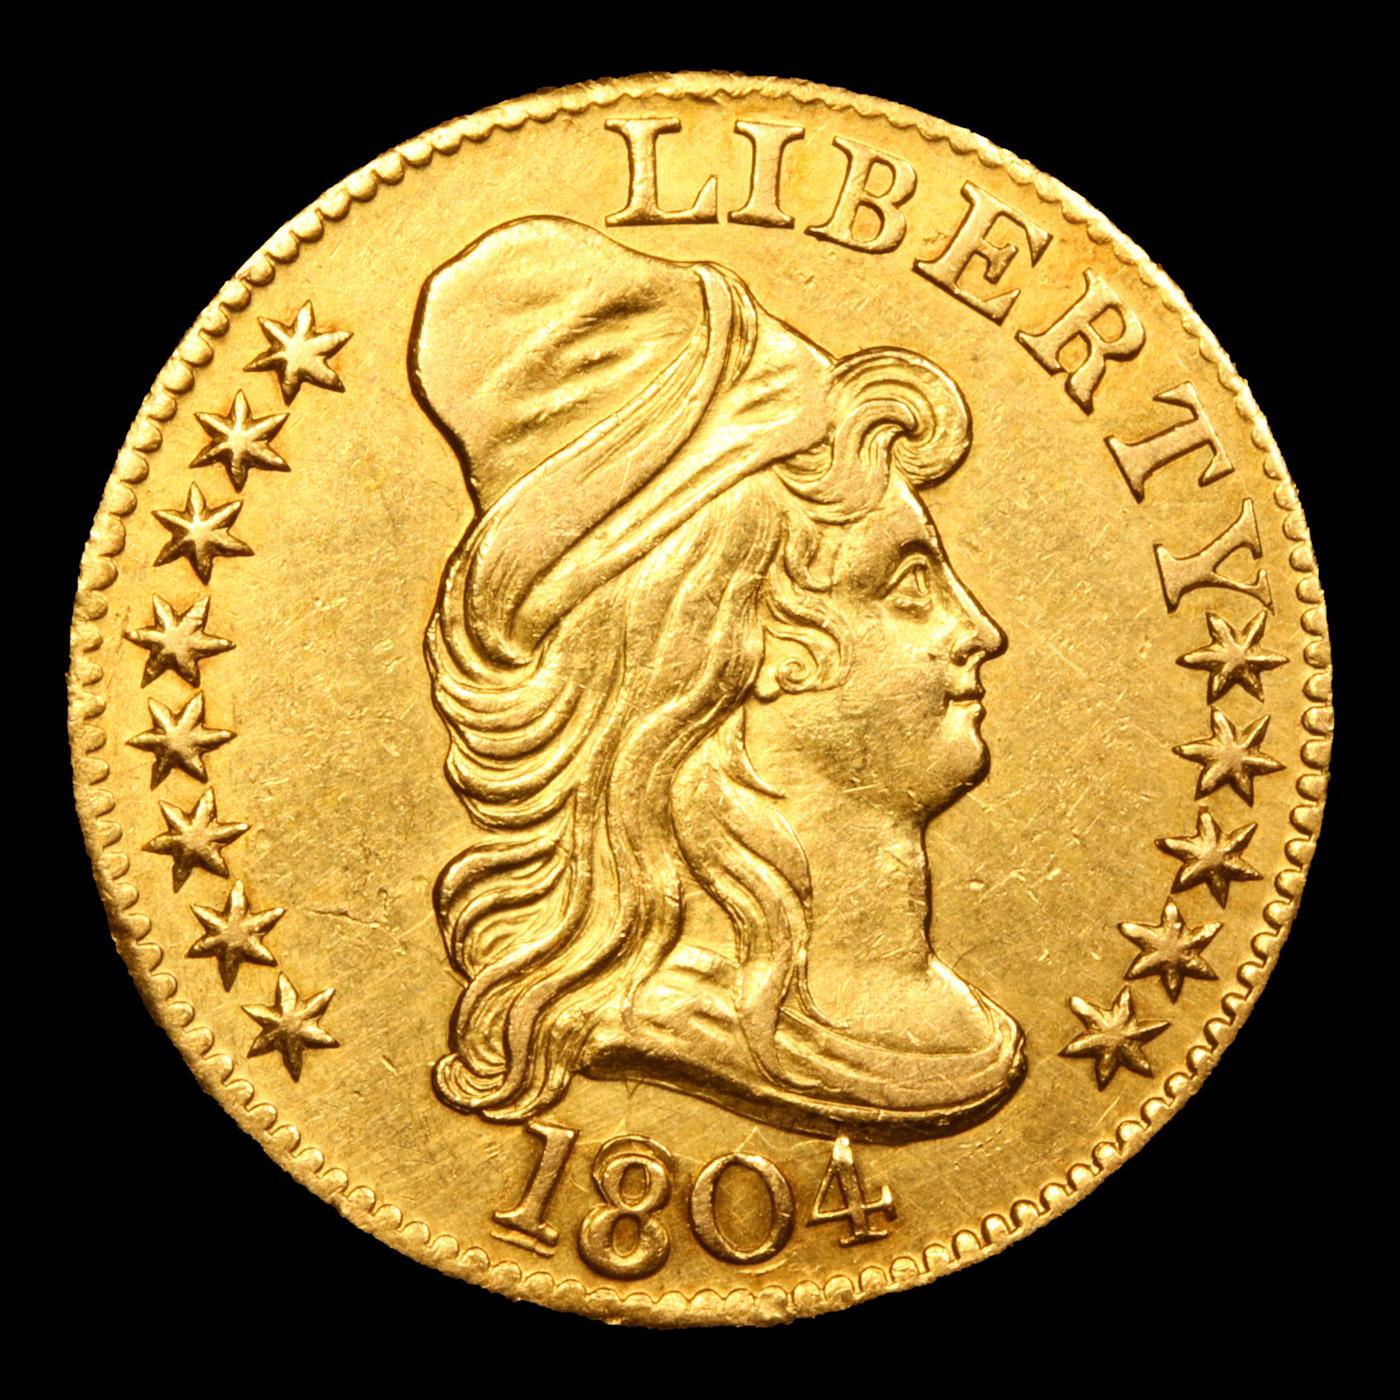 *HIGHLIGHT OF ENTIRE AUCTION* 1804 Small over Large 8 BD-7 R4 Gold Draped Bust $5 ms62 By SEGS (fc)